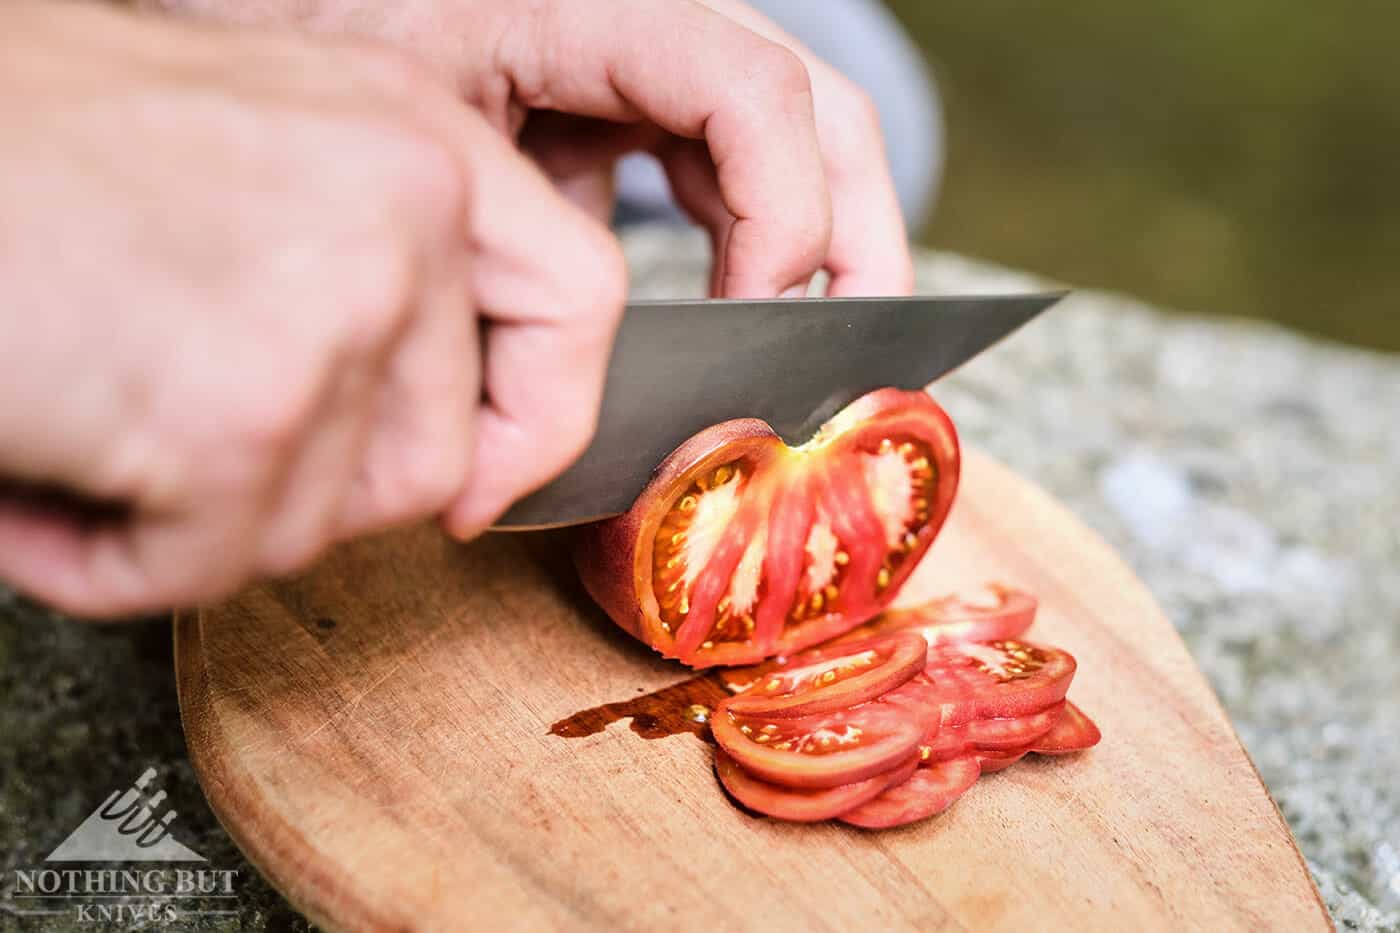 Slicing tomatoes effortlessly with a knife that is primarily a butcher knife. 